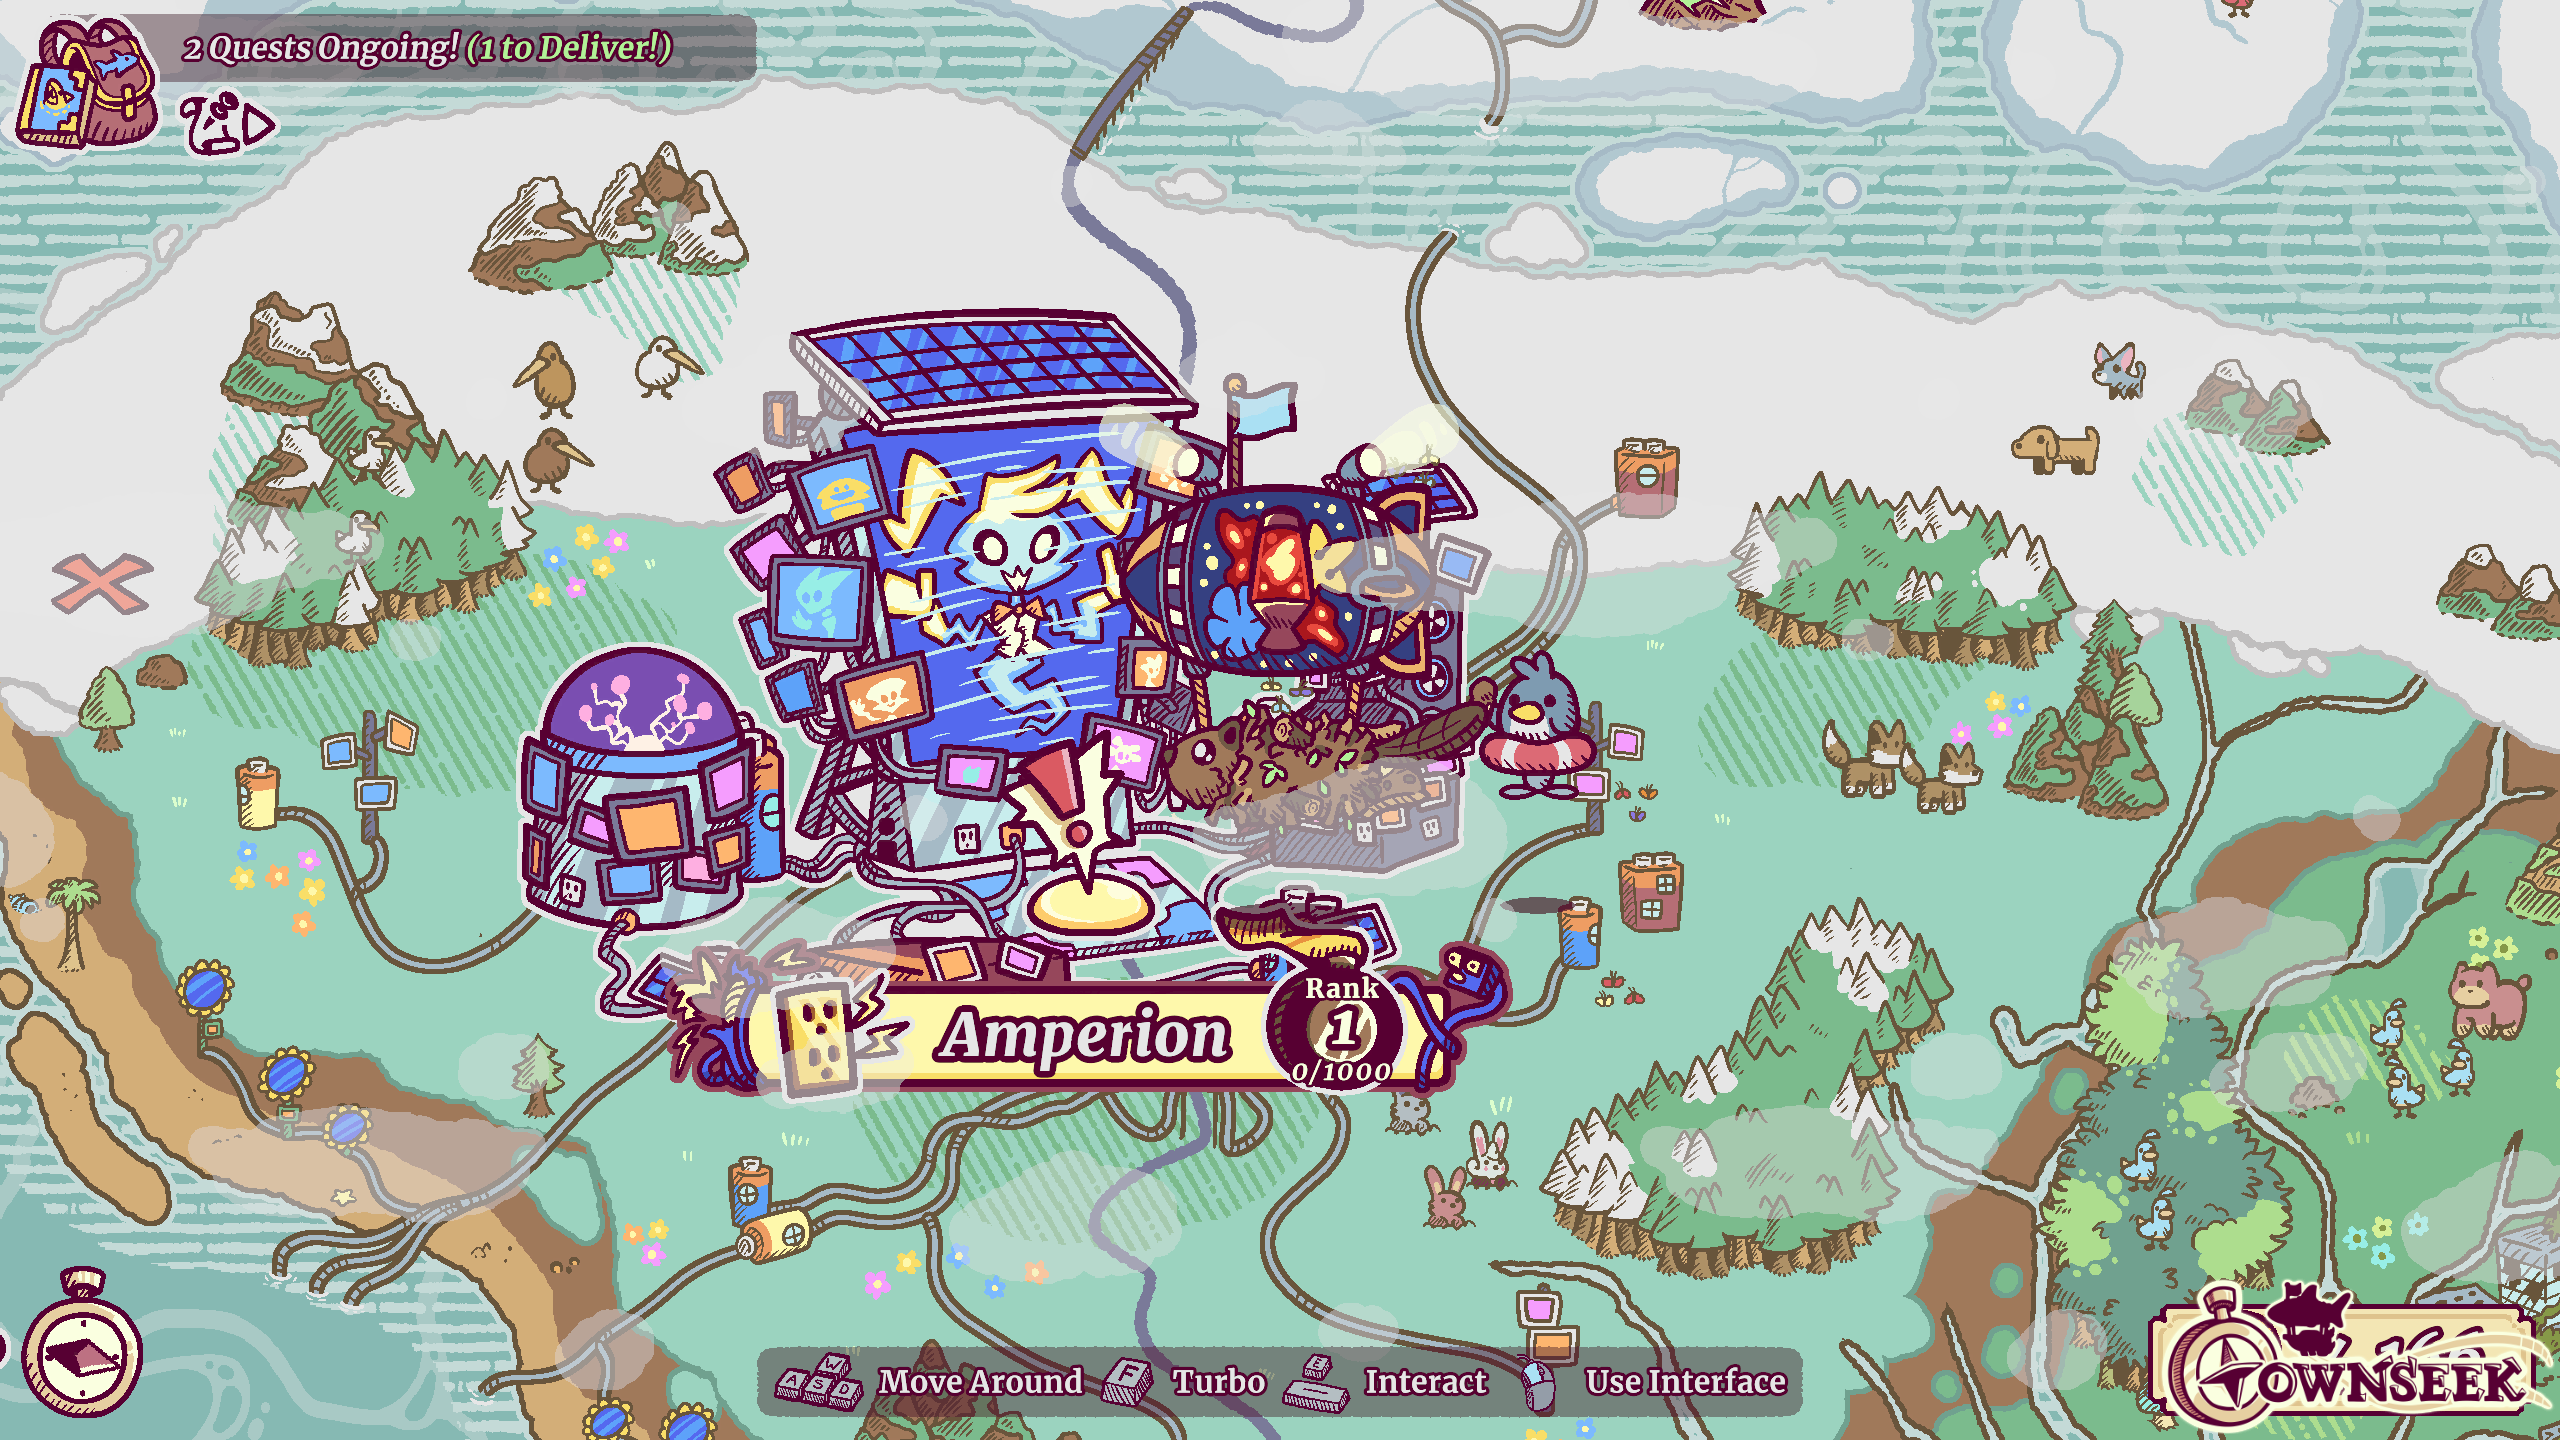 Screenshot of Townseek, featuring the town of Amperion. The town is near a glaciar area, and shows electrical beings spread around screens and multiple sockets.